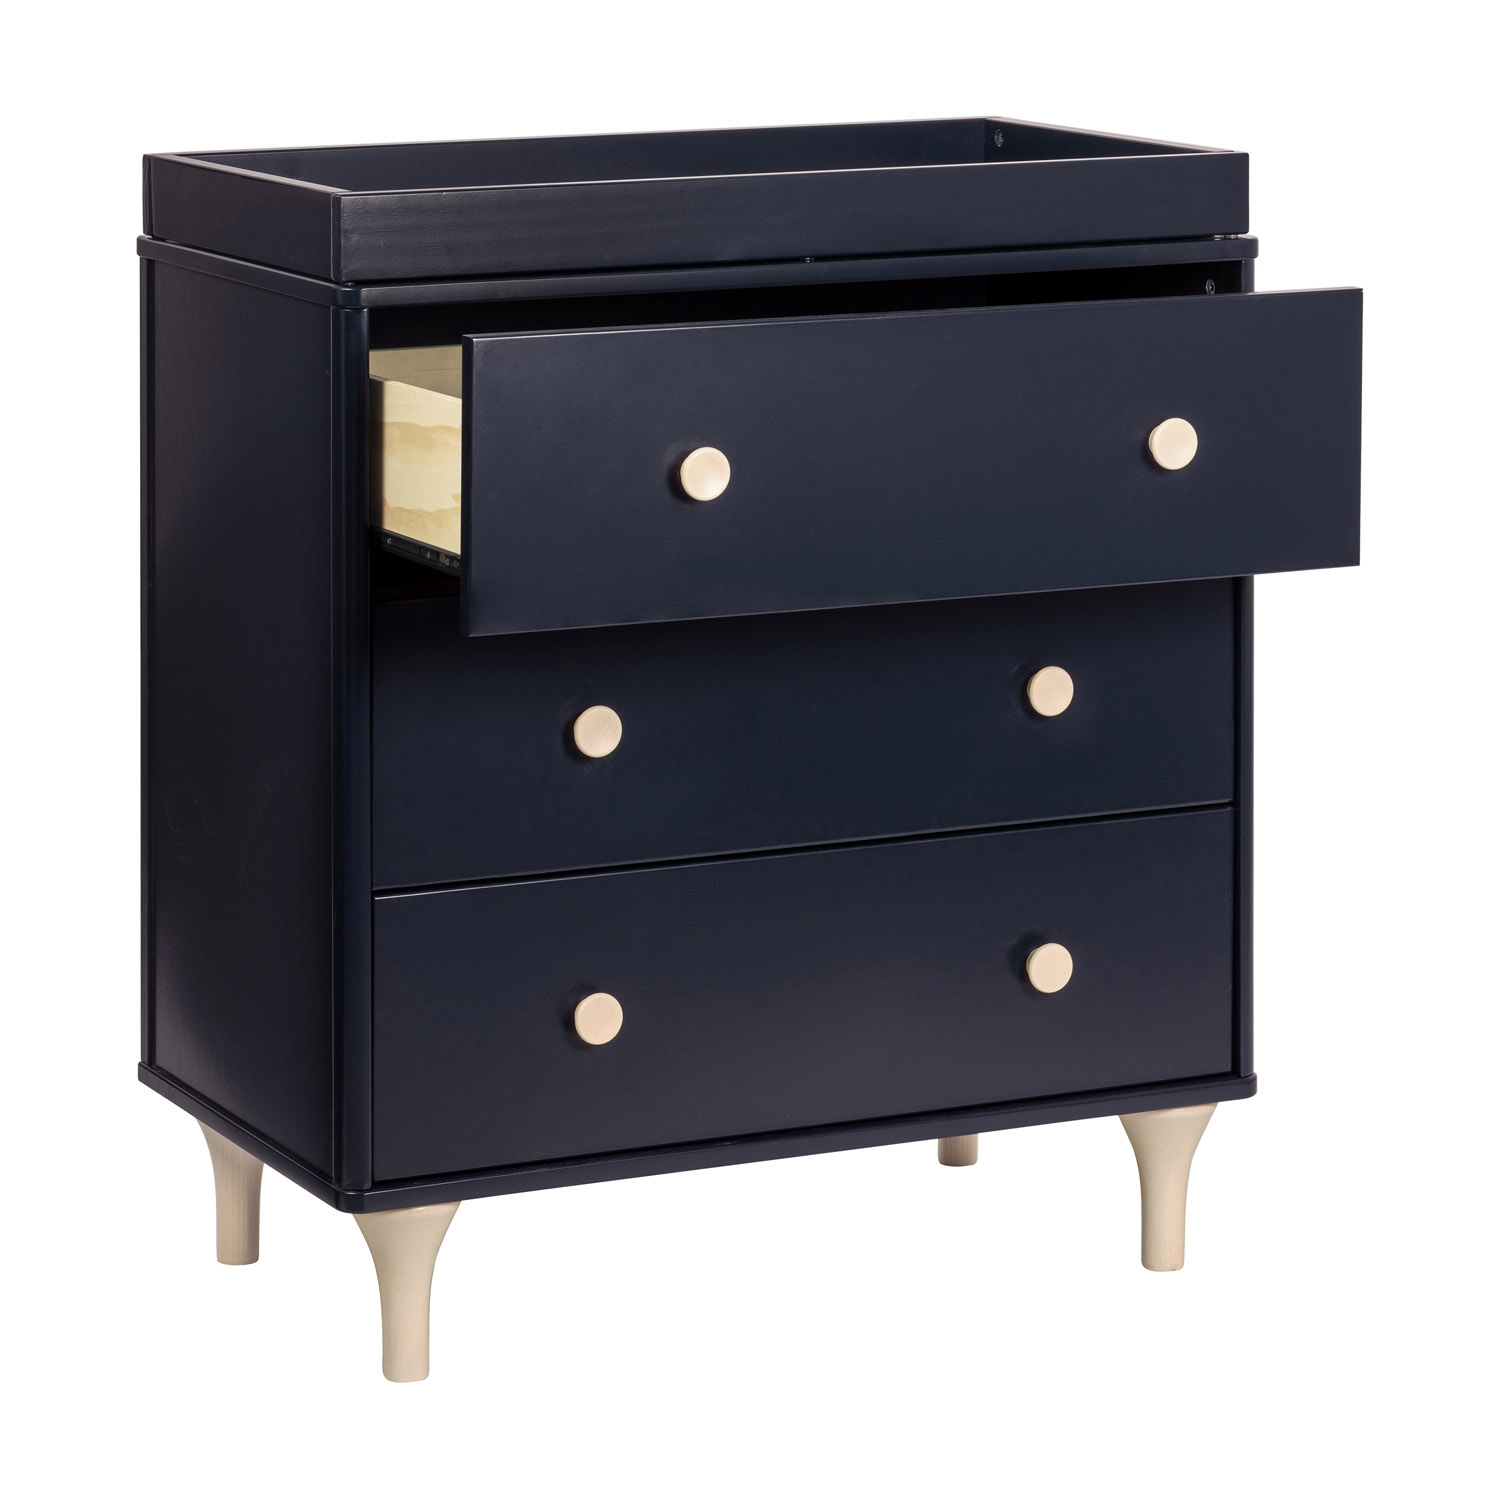 Babyletto Lolly Modern Classic Navy Blue Changing Station Dresser - Image 2